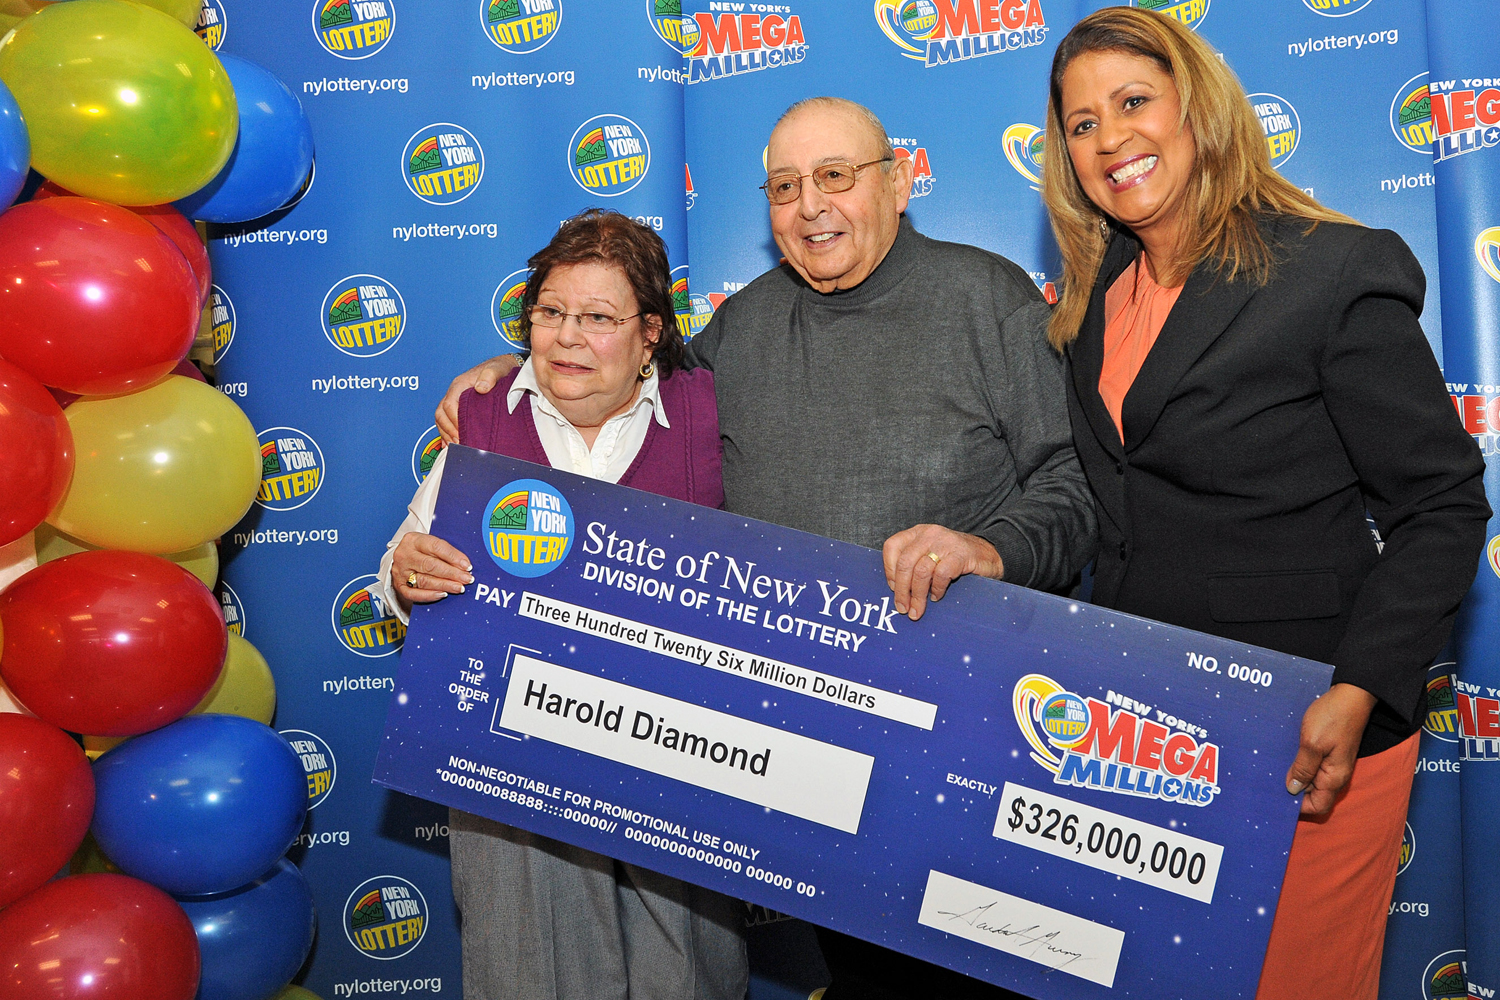 Harold Diamond and his wife Carol receive their ceremonial check from Yolanda Vega at the Valero gas station in the Town of Wallkill, N.Y., on Monday, Jan. 12, 2015. (John DeSanto/Times Herald-Record—AP)